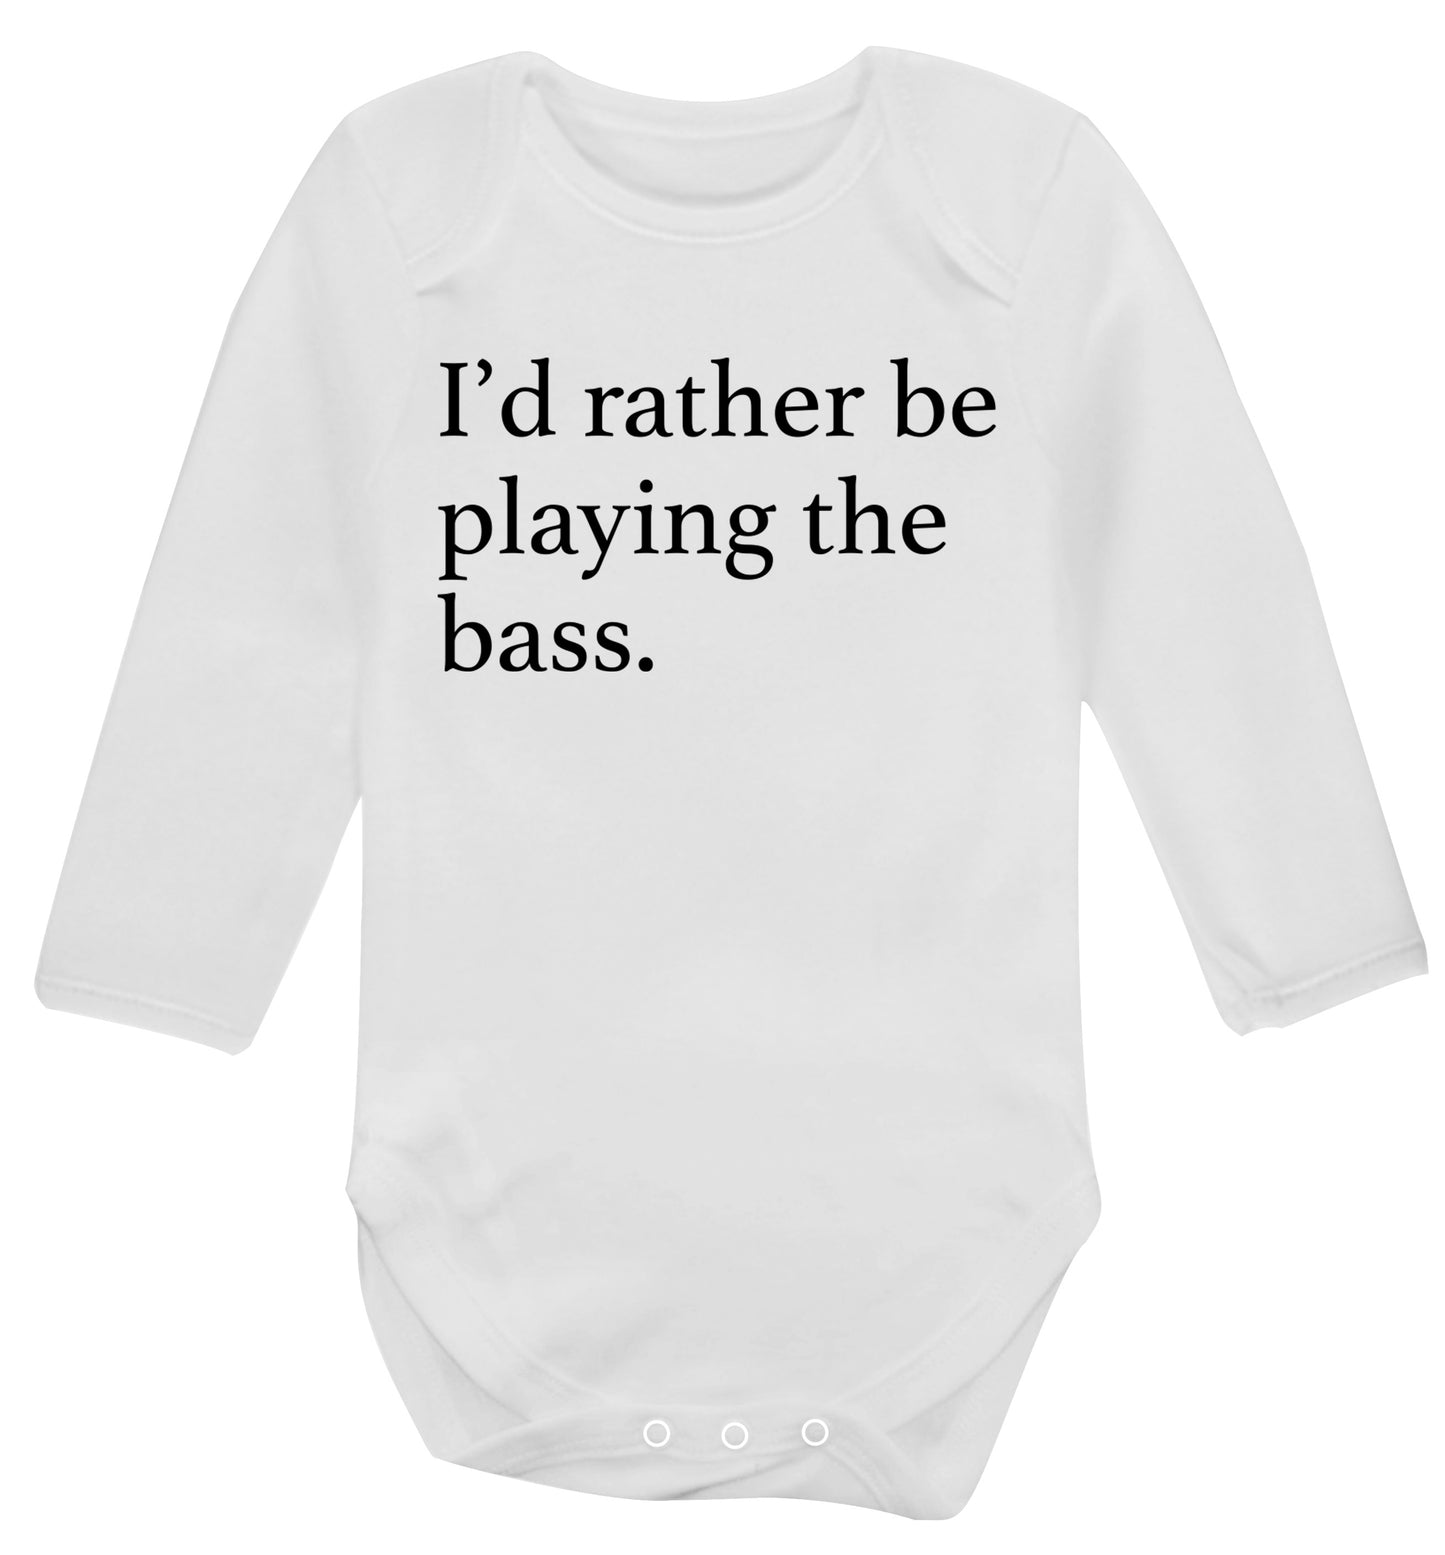 I'd rather by playing the bass Baby Vest long sleeved white 6-12 months